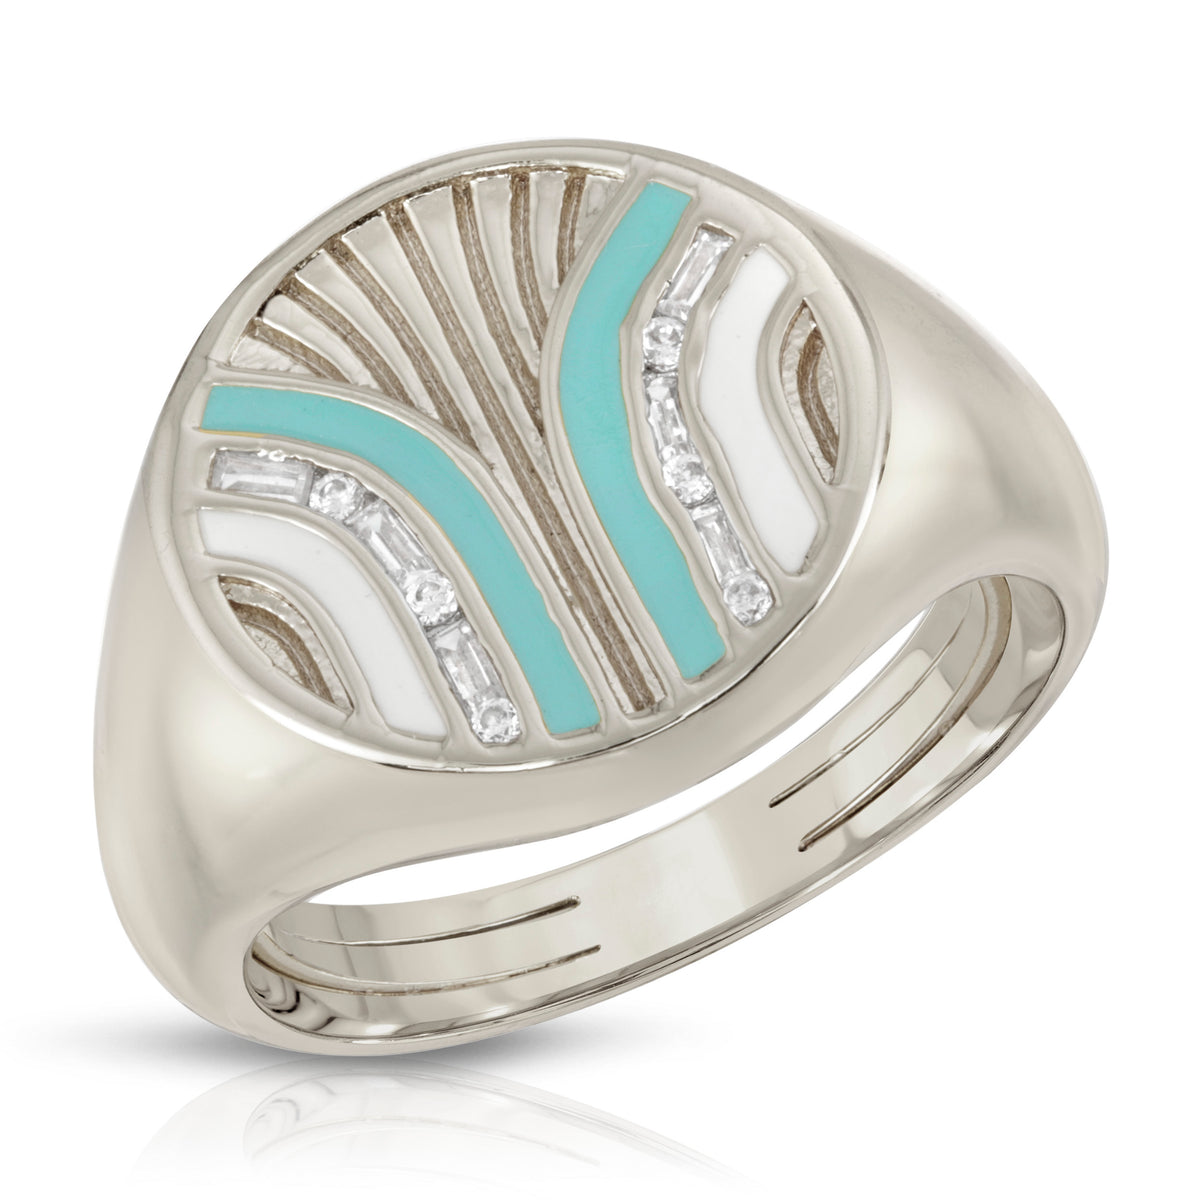 South Beach Signet Ring- Turquoise/White